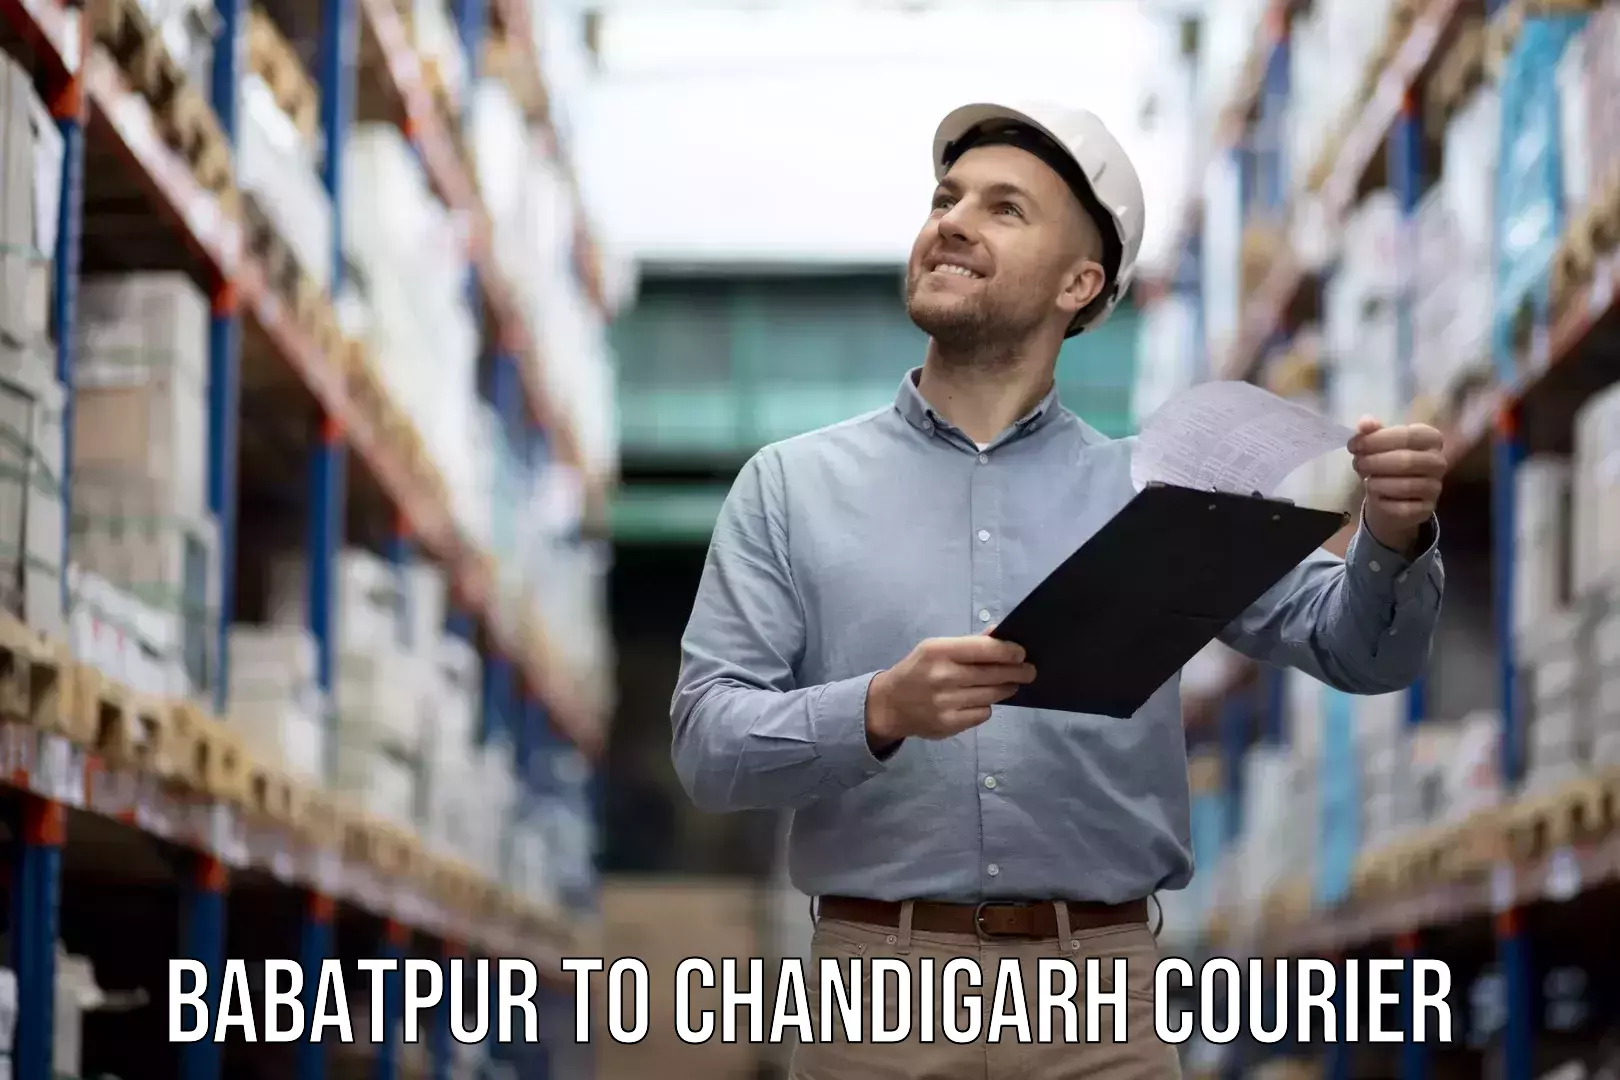 Professional moving company Babatpur to Chandigarh